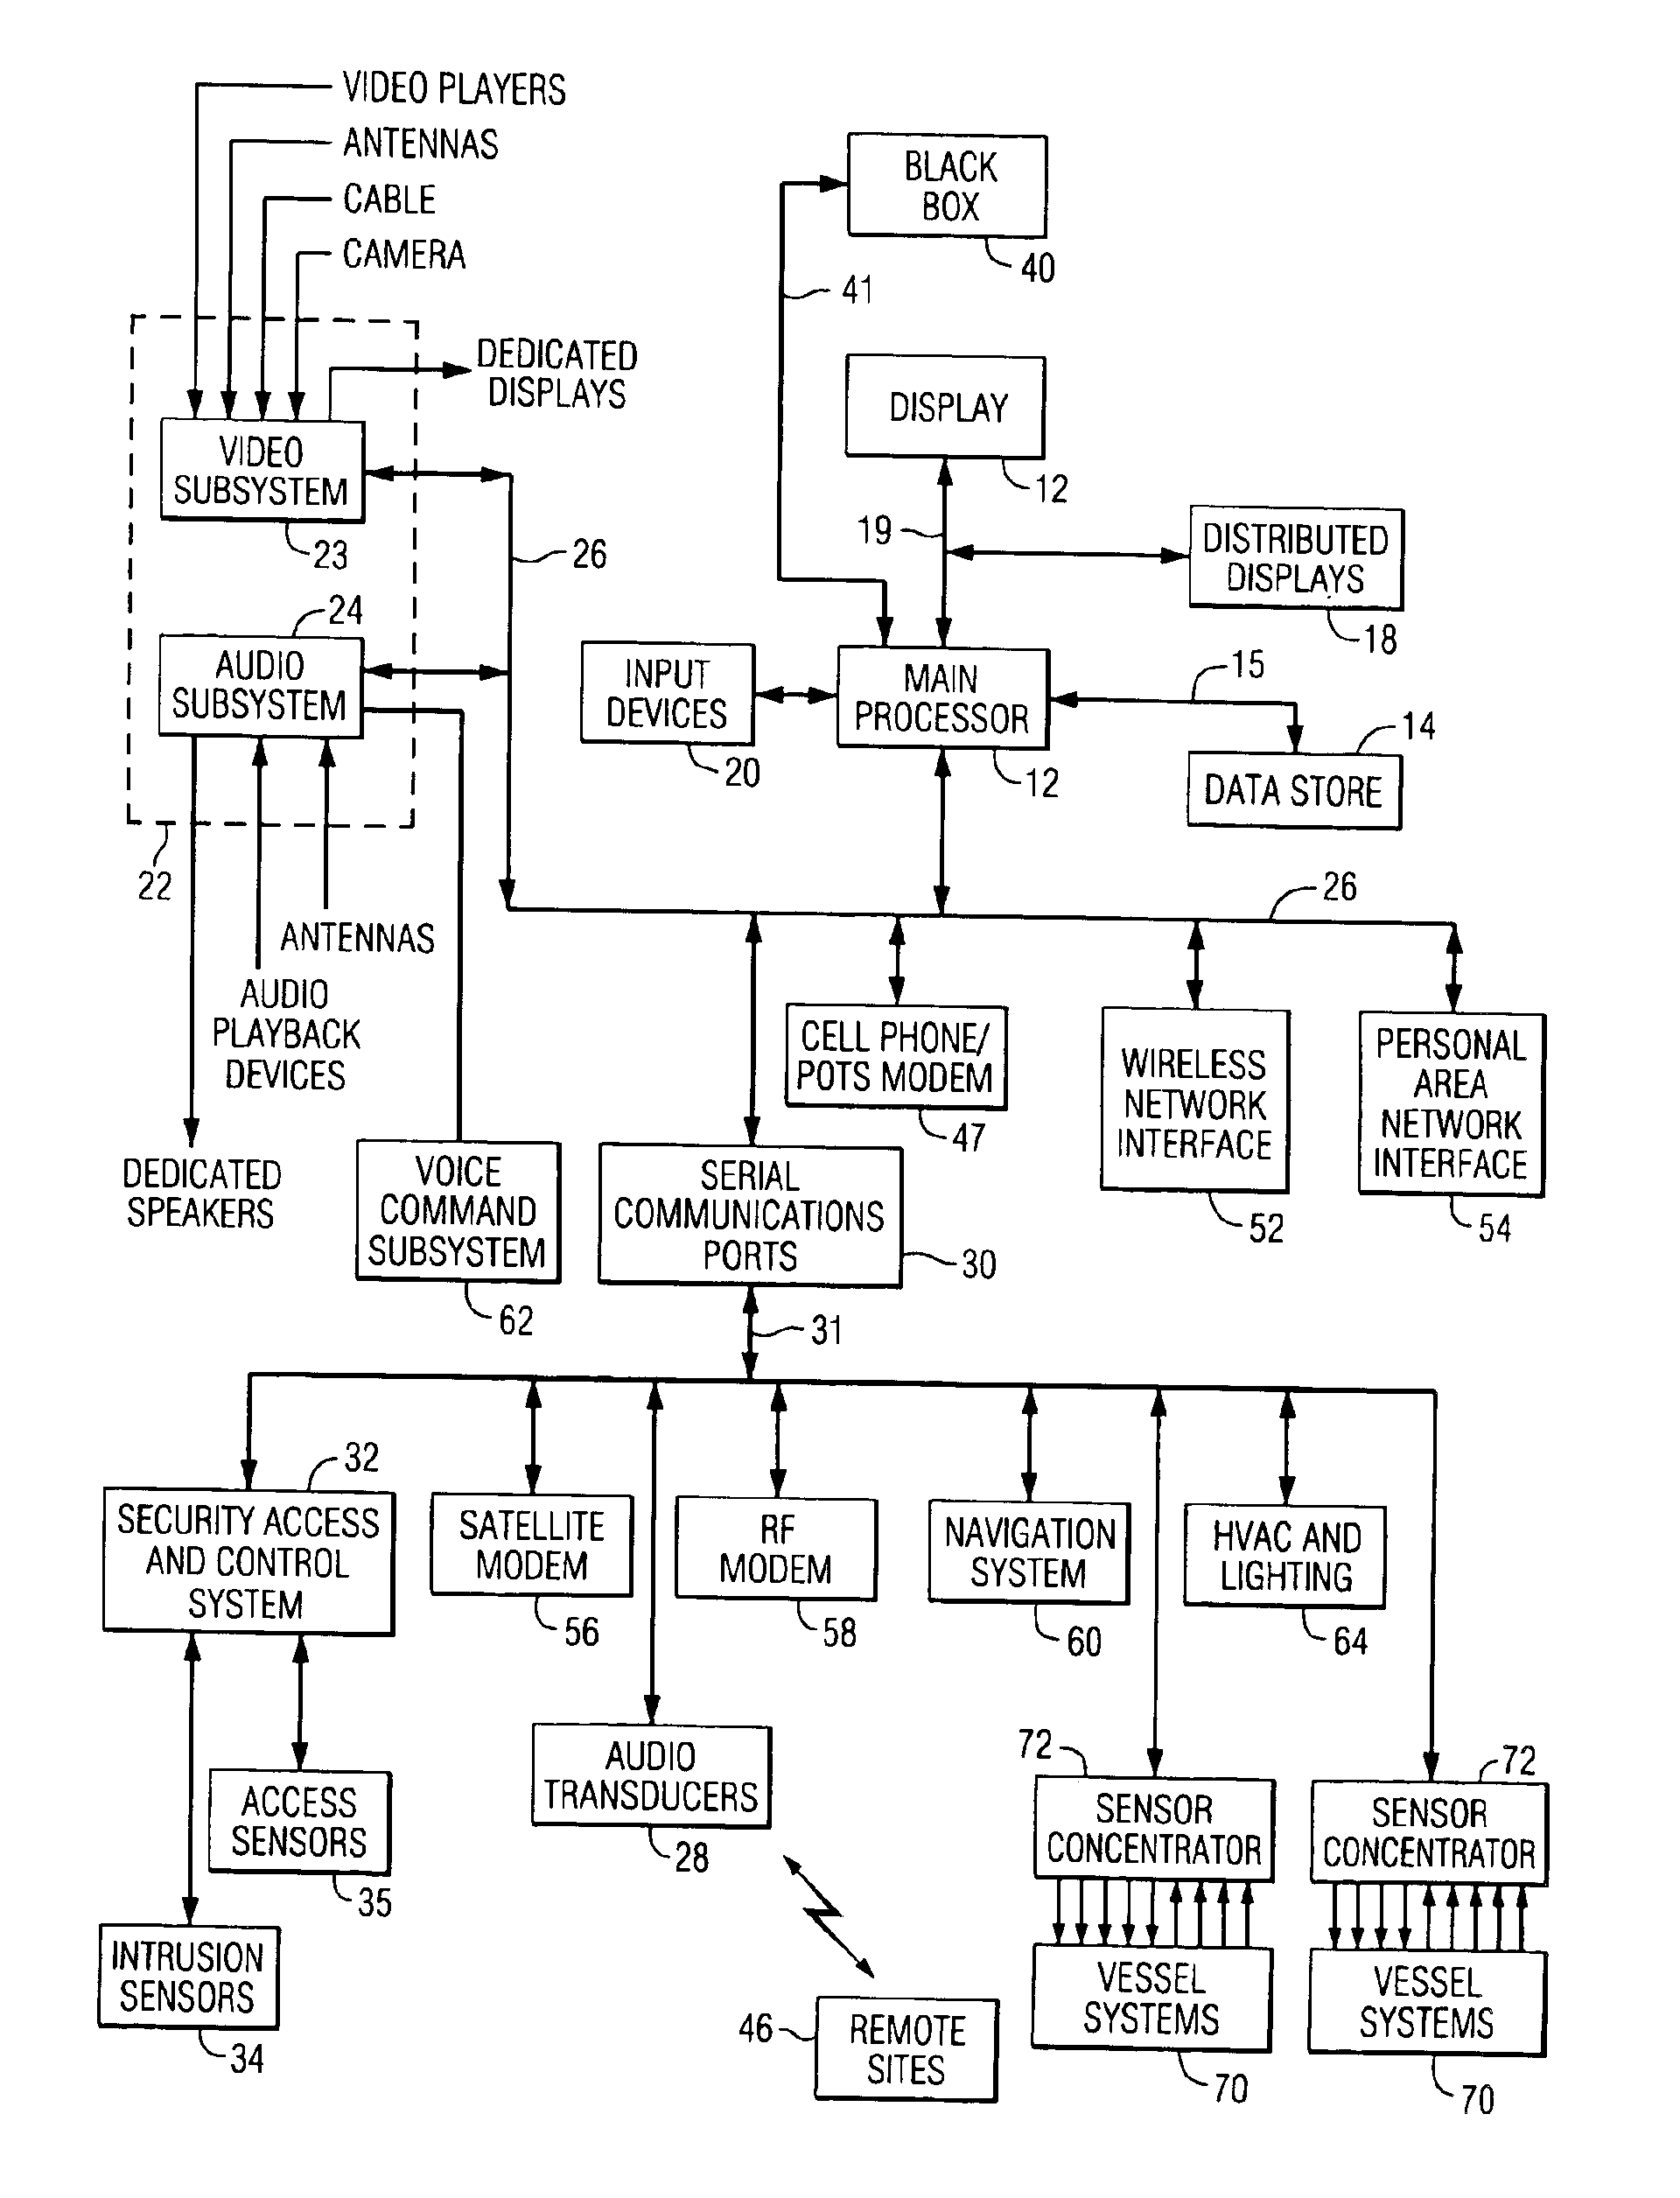 Integrated vessel monitoring and control system